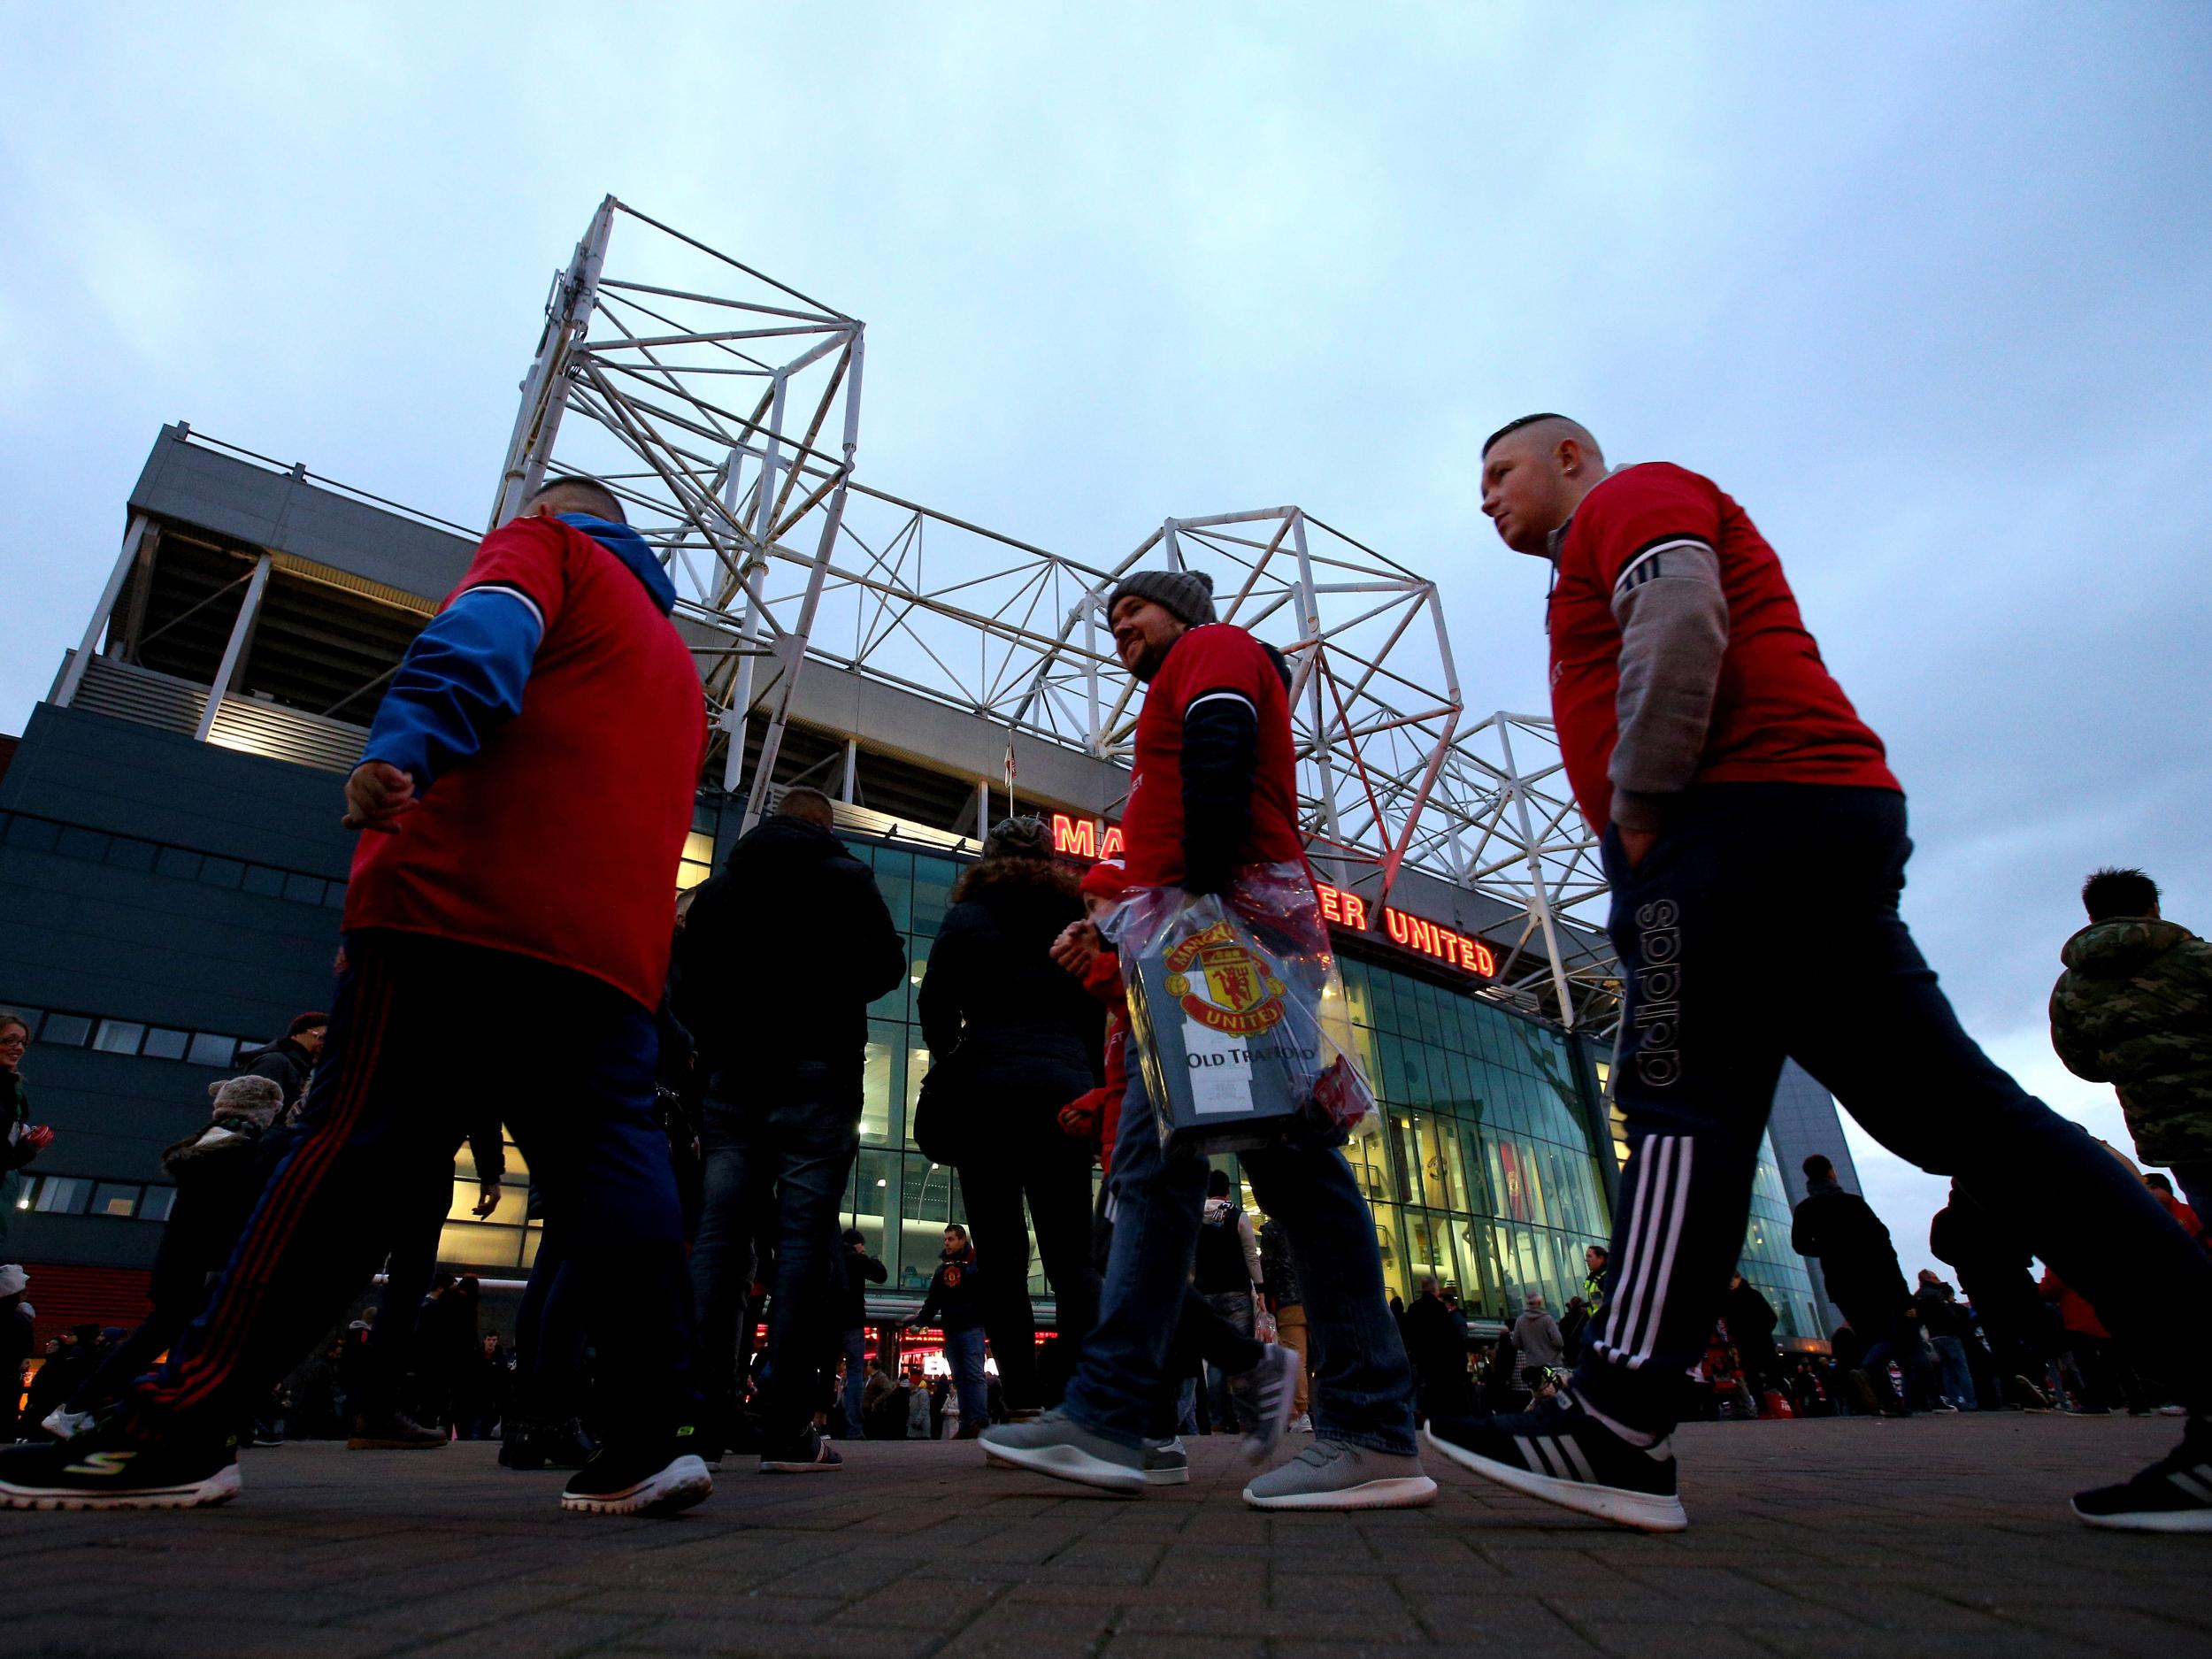 United fans may now forfeit their tickets as a result of the price hike